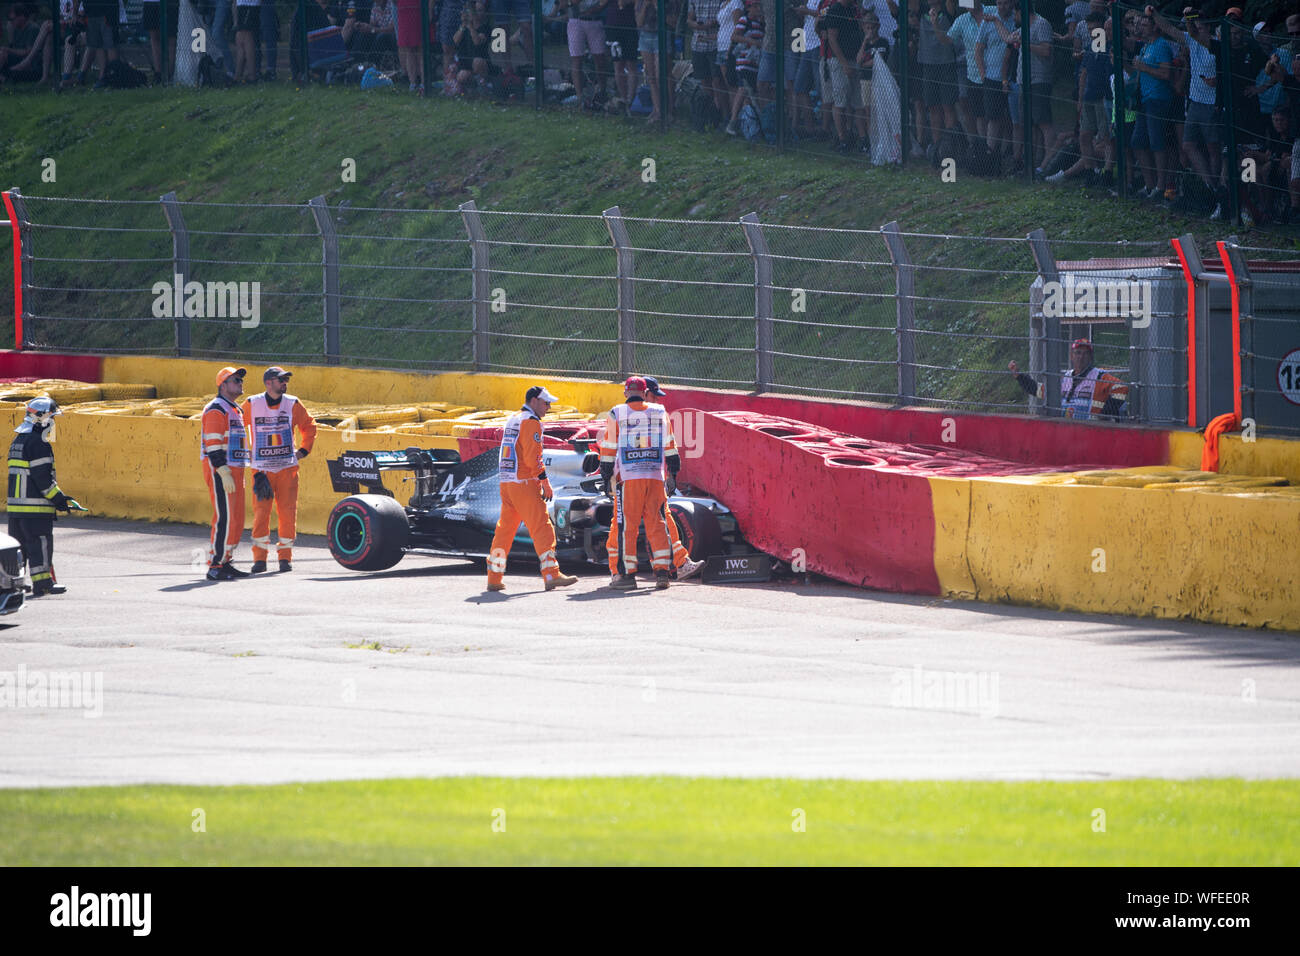 Stavelot, Belgium. 31st Aug, 2019. Aftermath of Lewis Hamilton, #44, crash in free practice 3 at the Belgian Grand Prix, Spa Francorchamps, as his Mercedes is pulled from the catch barriers. Credit: Will Broadhead/Alamy Live News Stock Photo